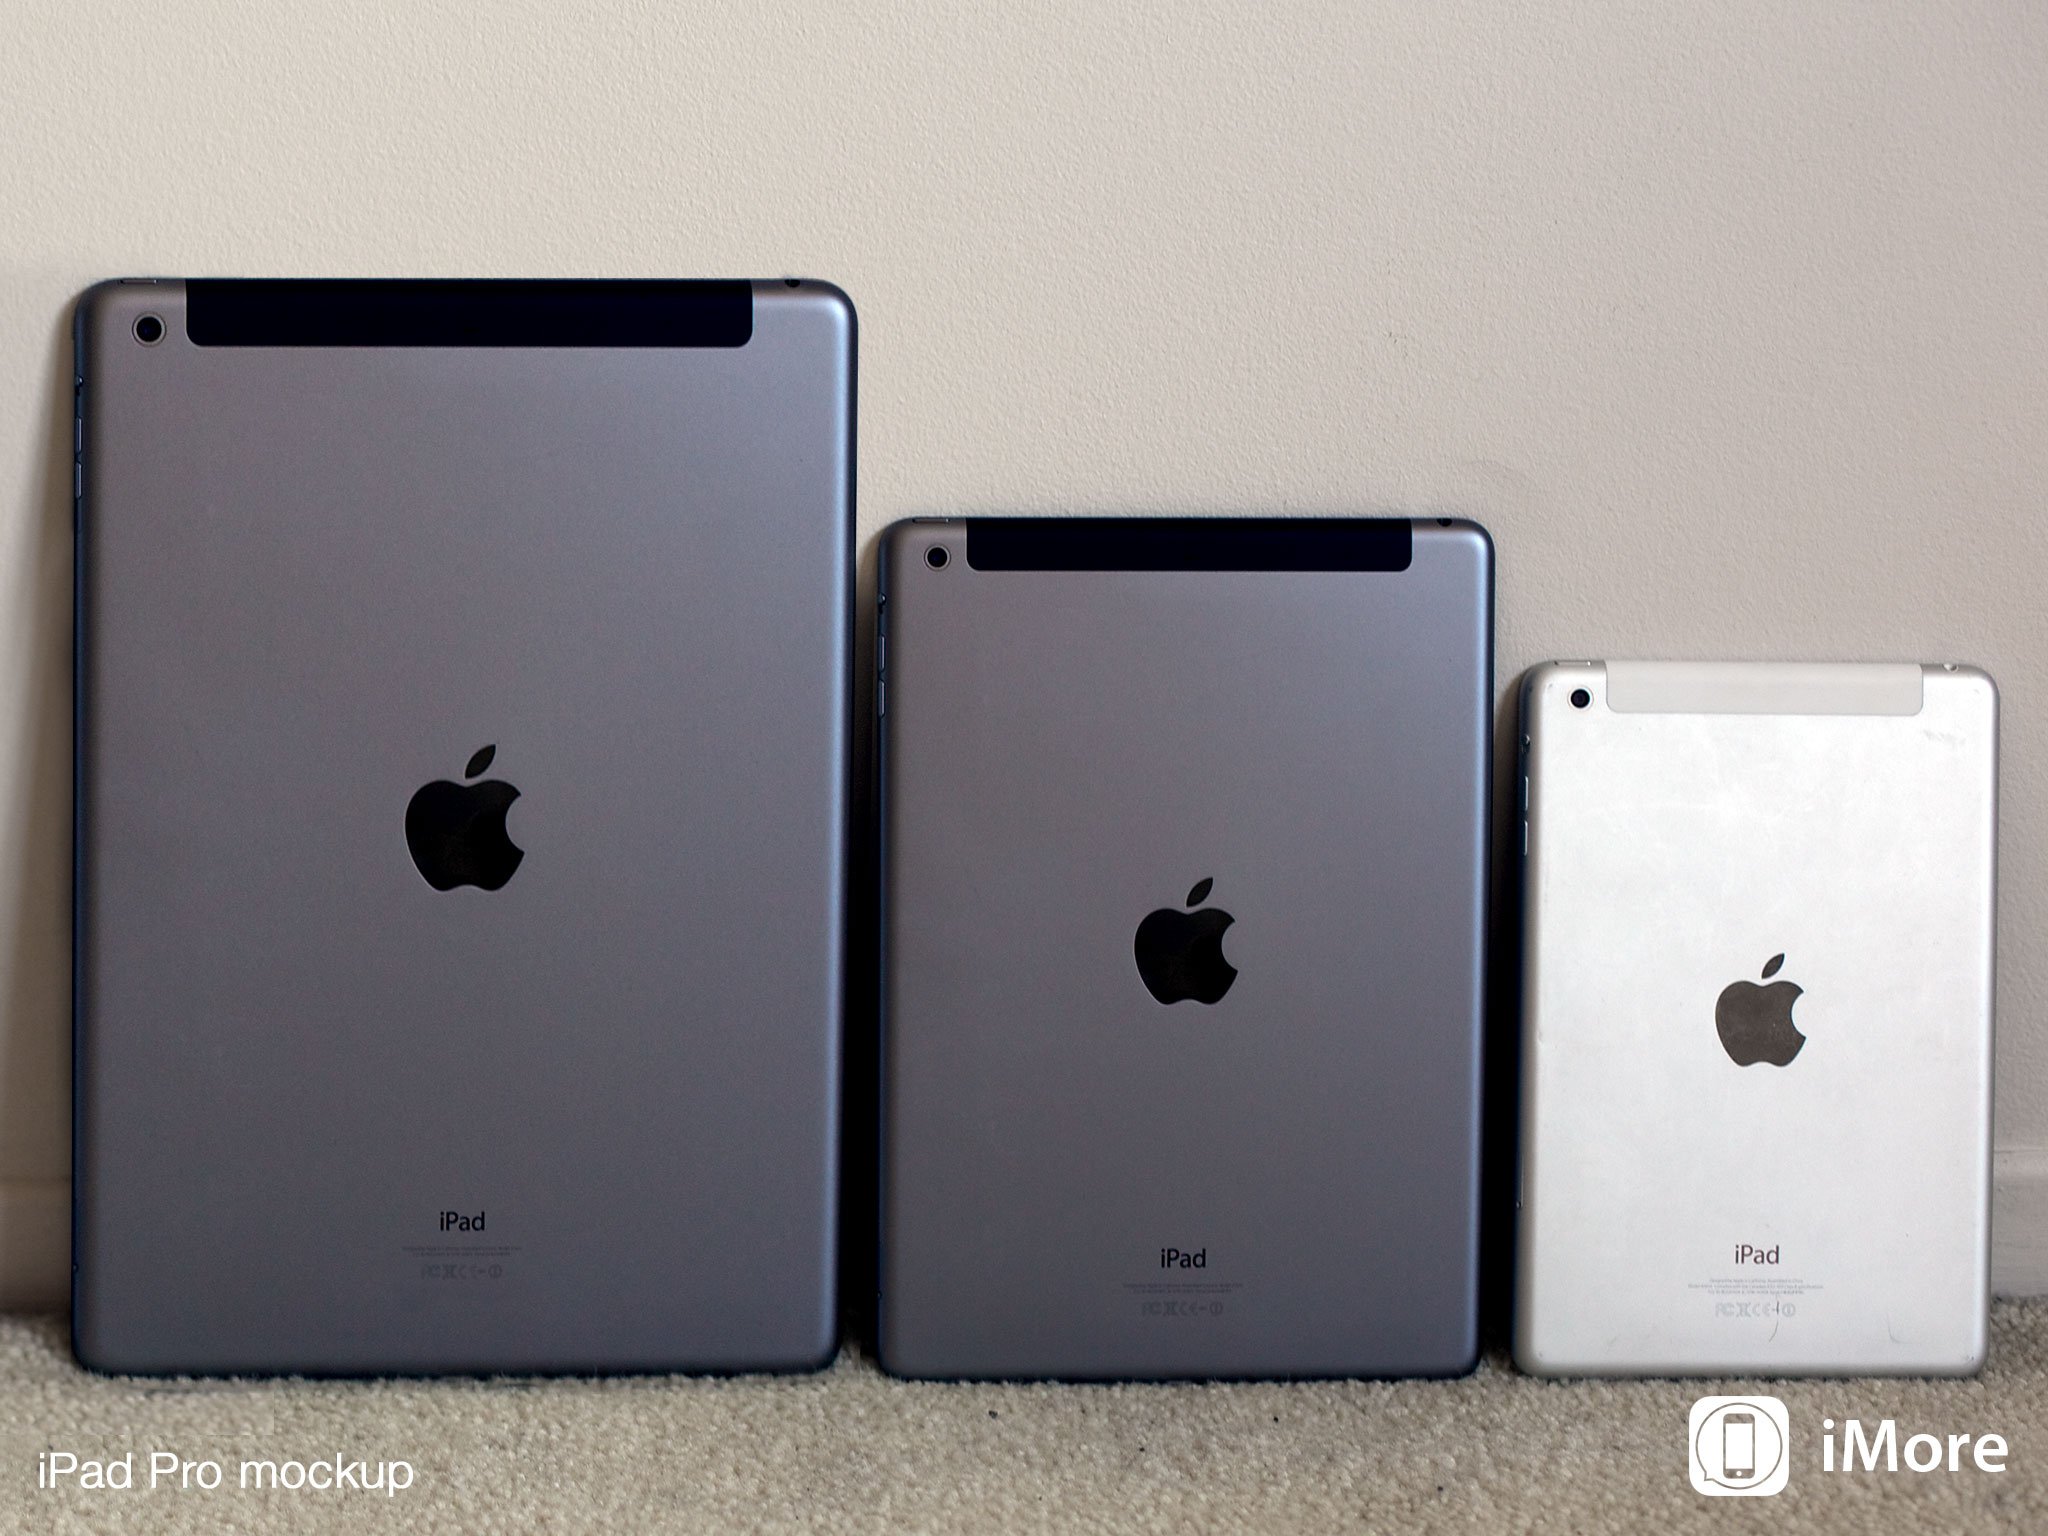 iPad Air Plus rumored for first half of 2015 | iMore